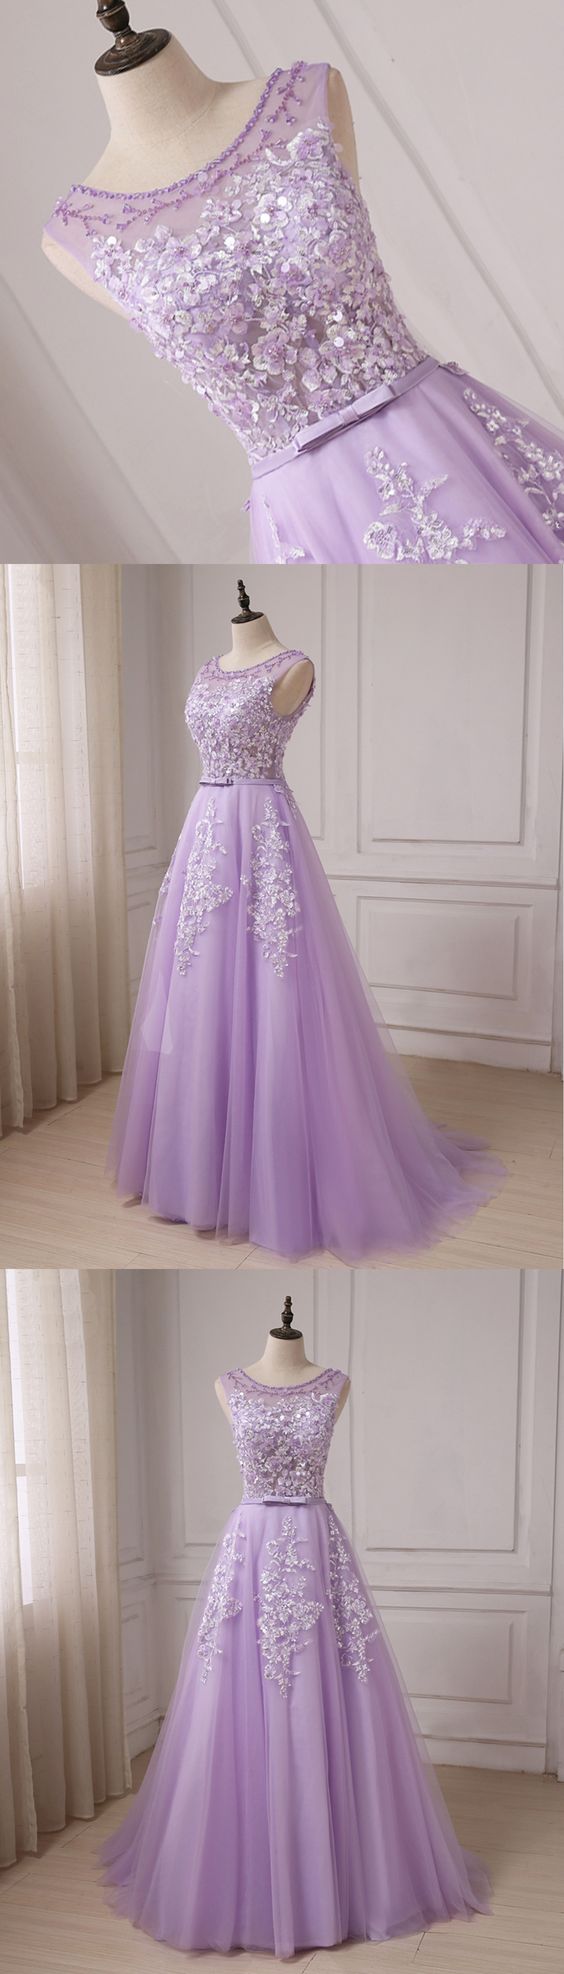 Beautiful Lavender Tulle Lace Applique Long Teen Party Dress, Junior Prom Dress, Formal Gowns